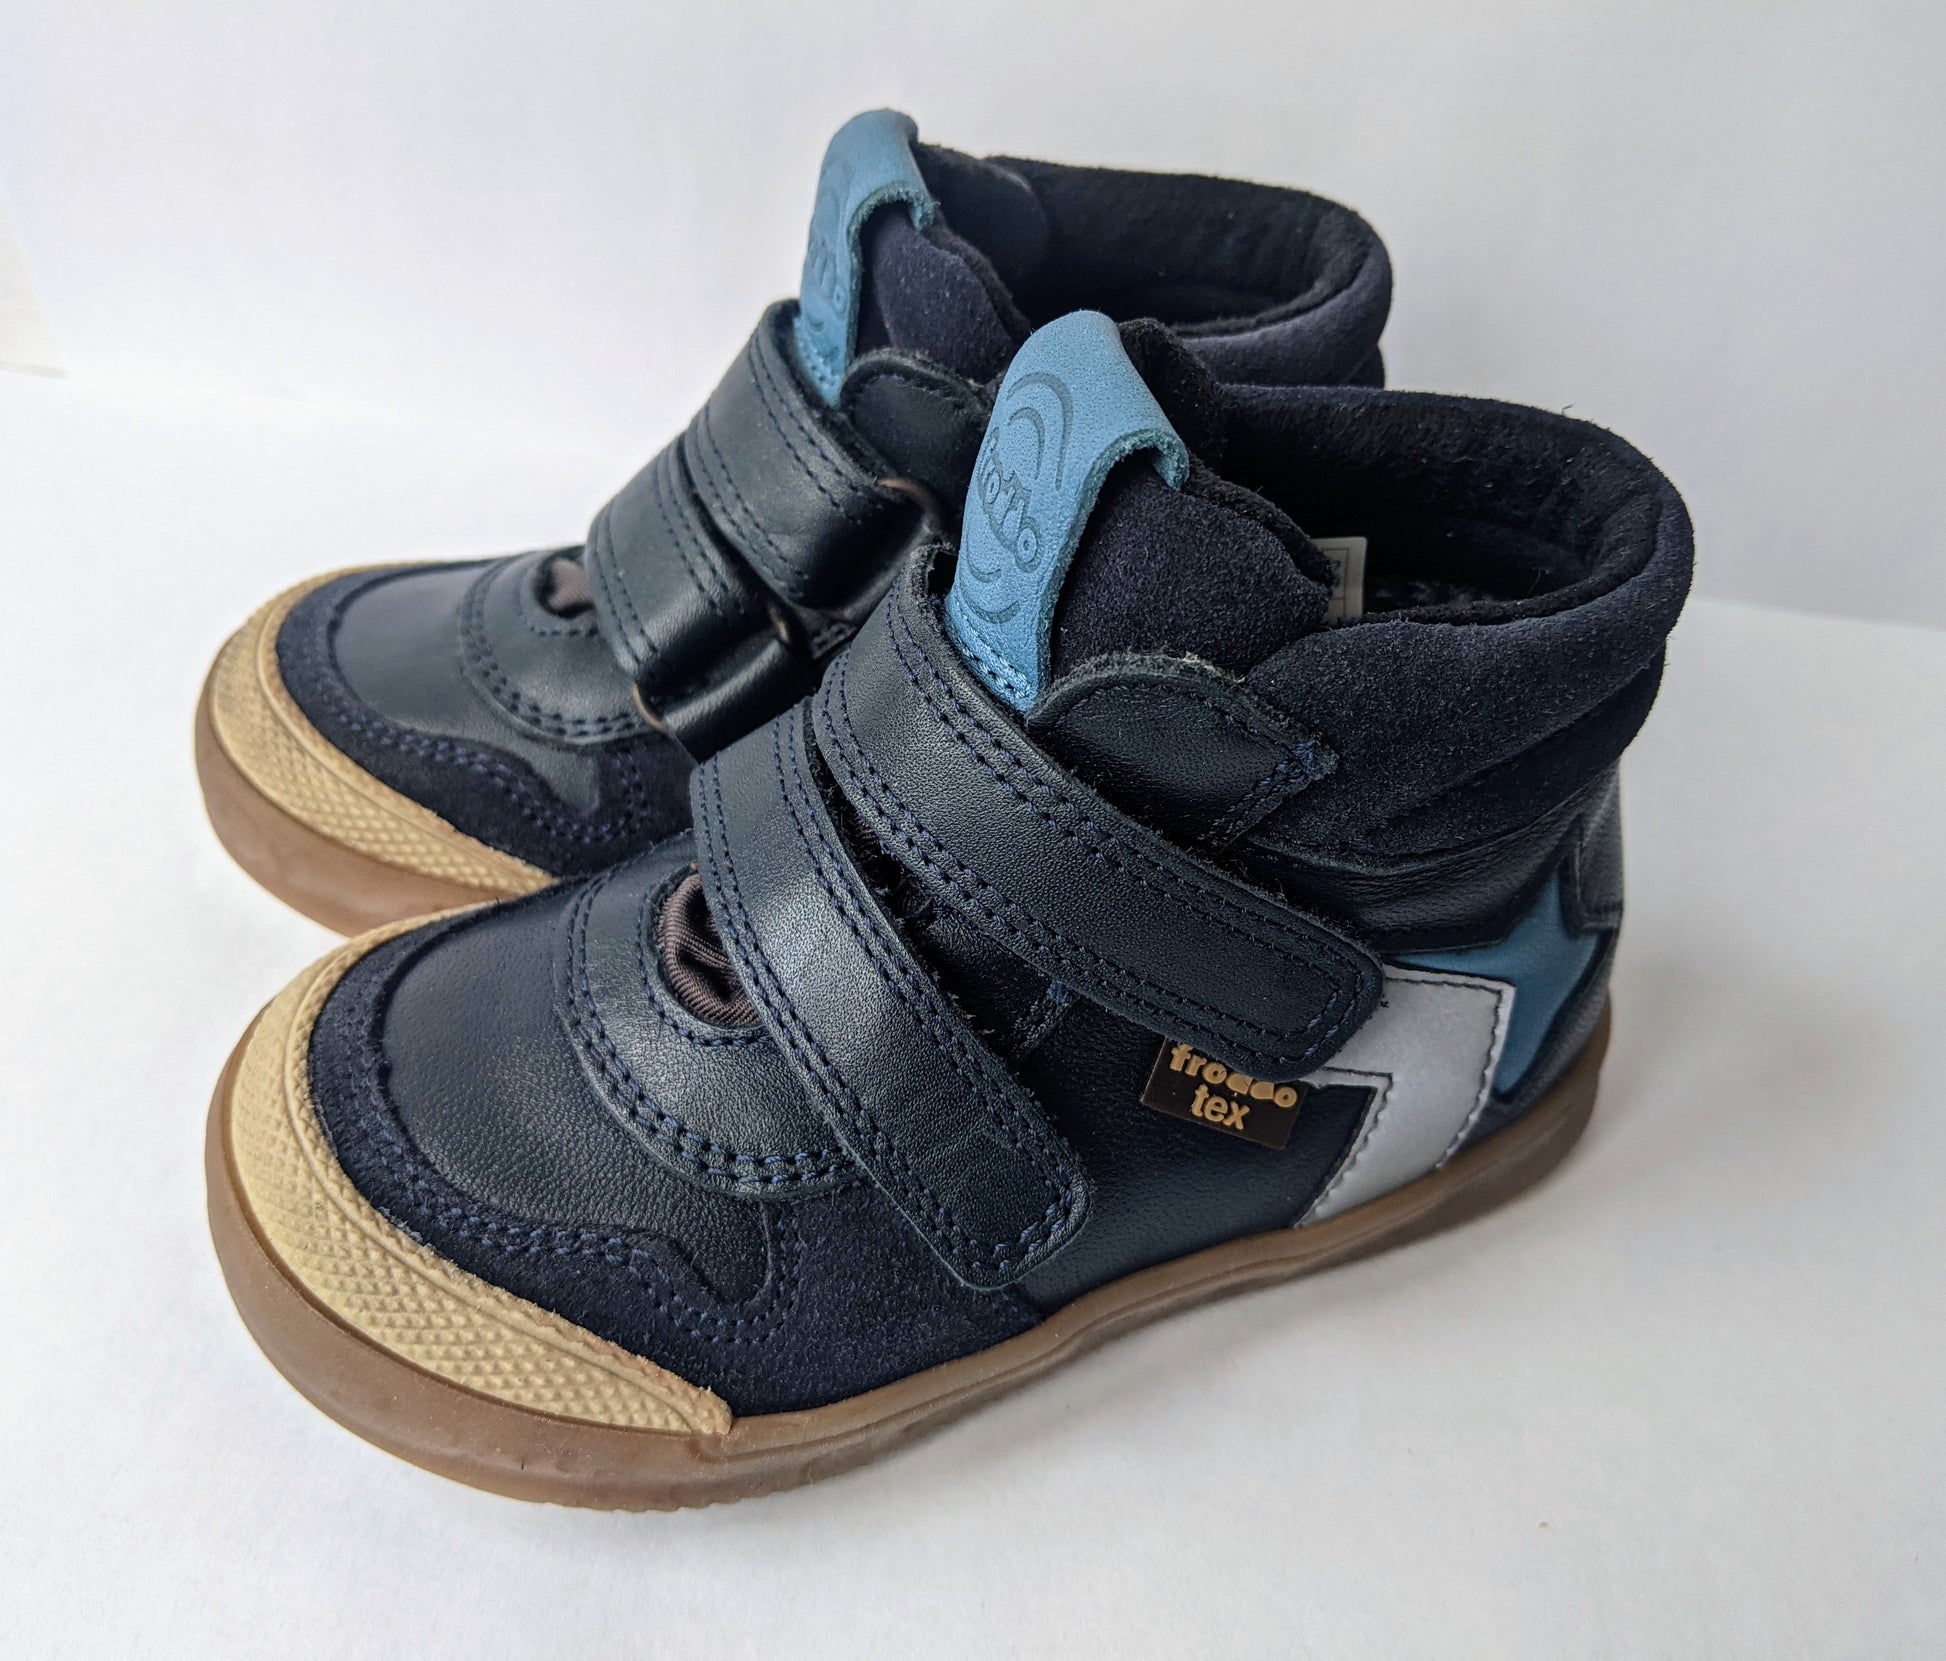 A pair of boys casual boots by Froddo, style G2110083, in Navy and blue leather and nubuck with double velcro fastening. Angled view.